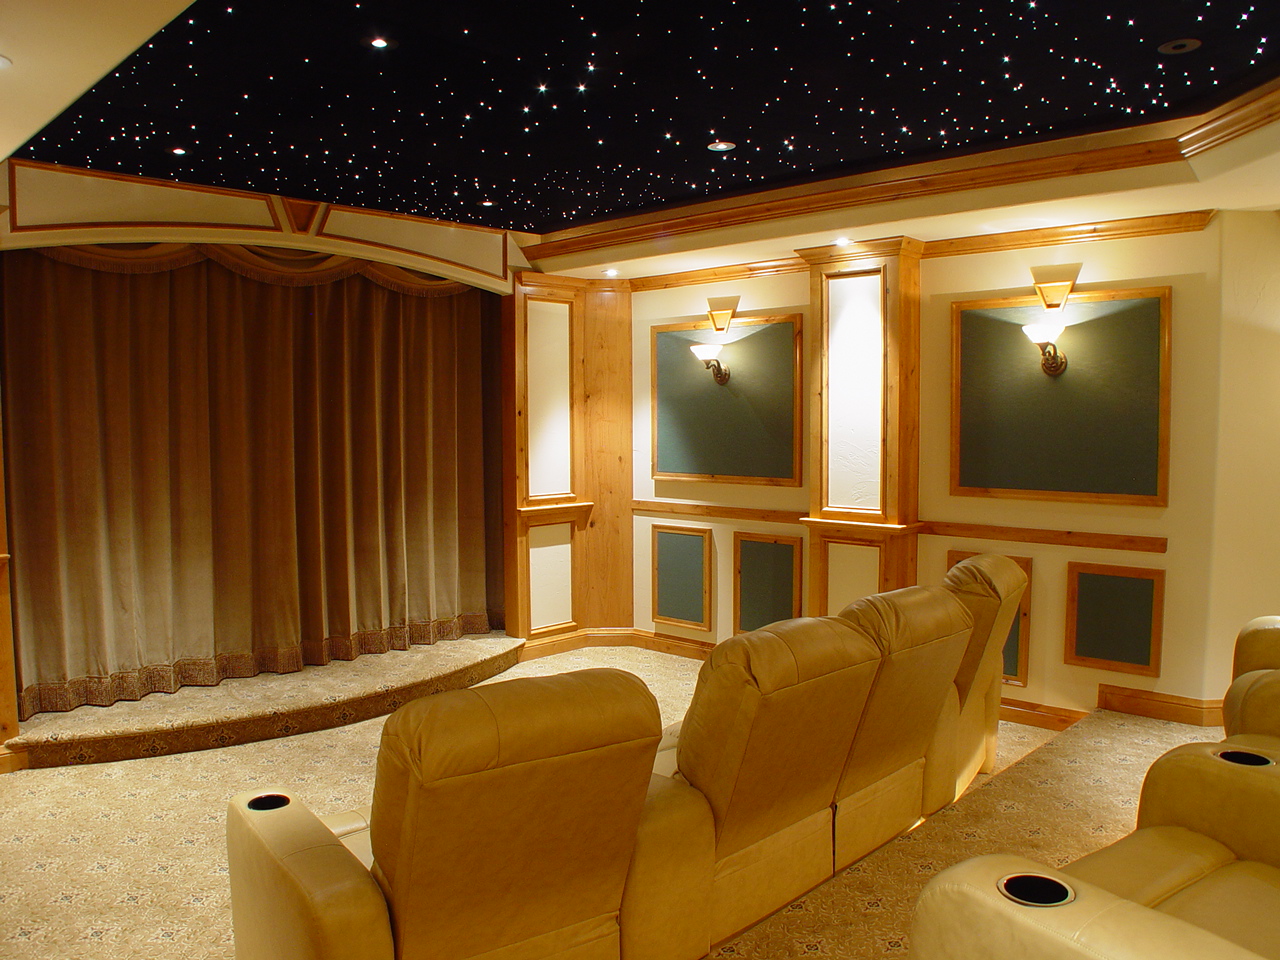 How to Enhance Your Home Theater with Automation